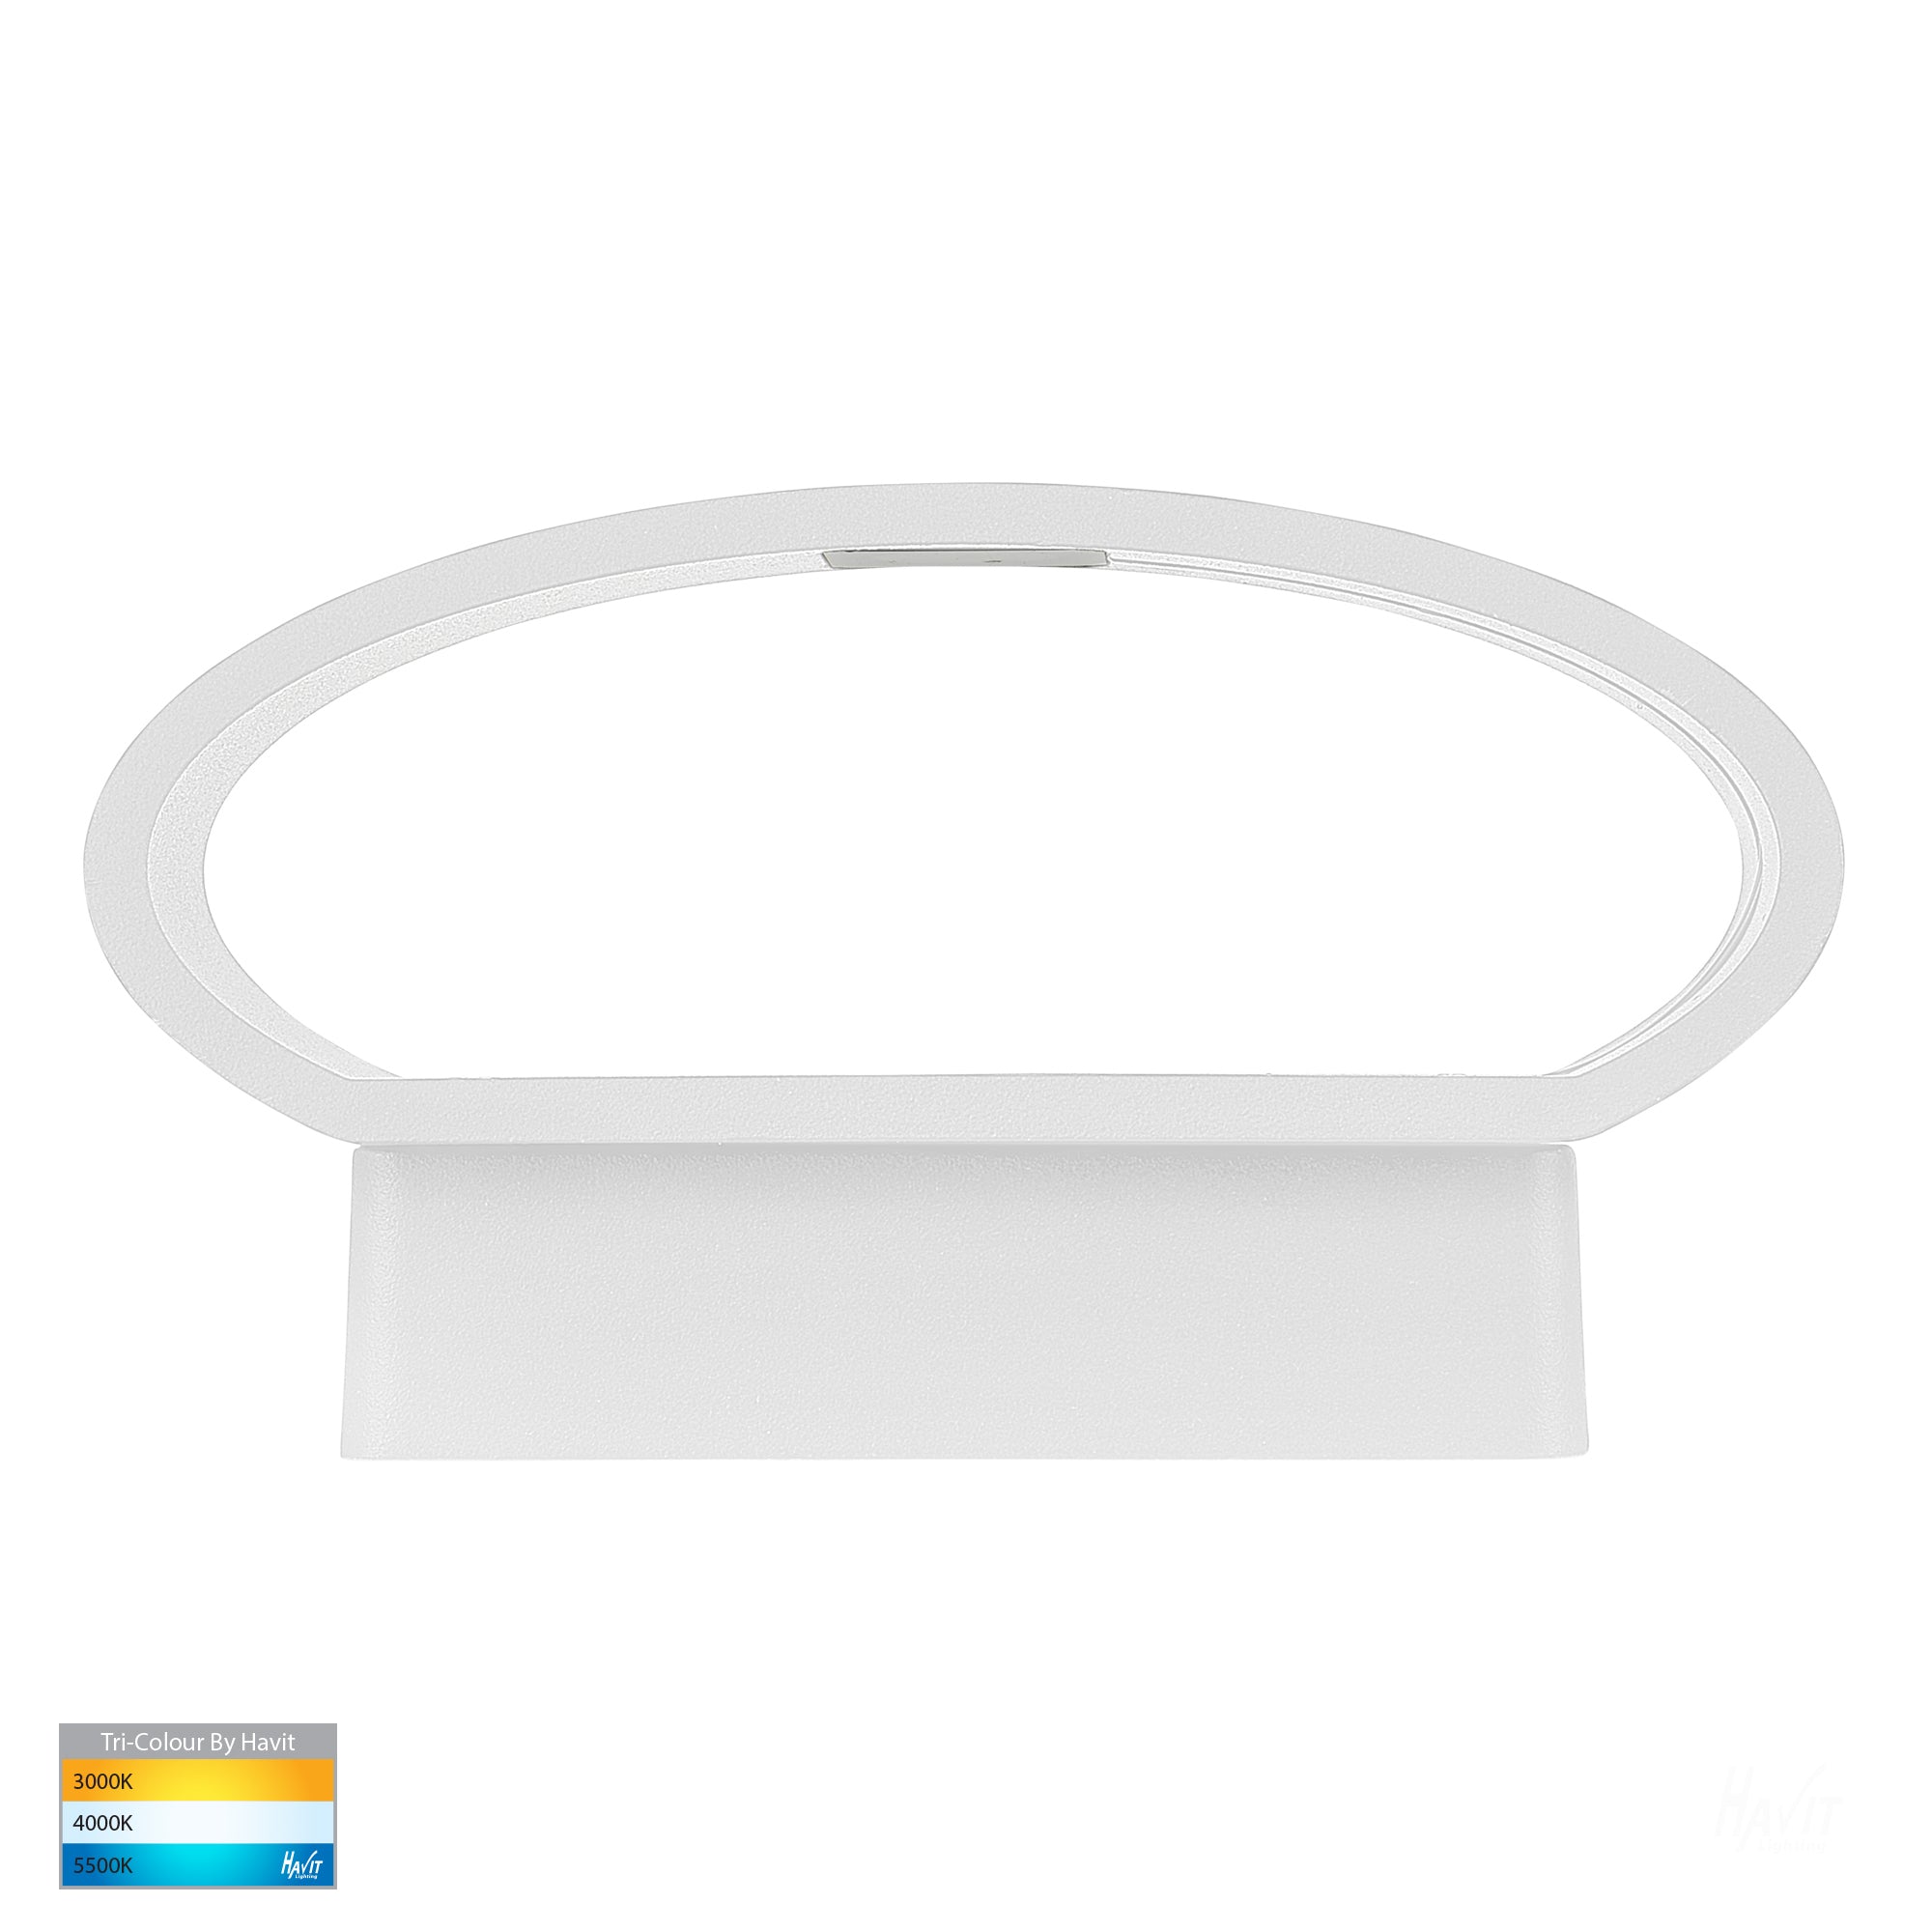 HV3661T-WHT - Luxe White TRI Colour Up & Down LED Wall Light